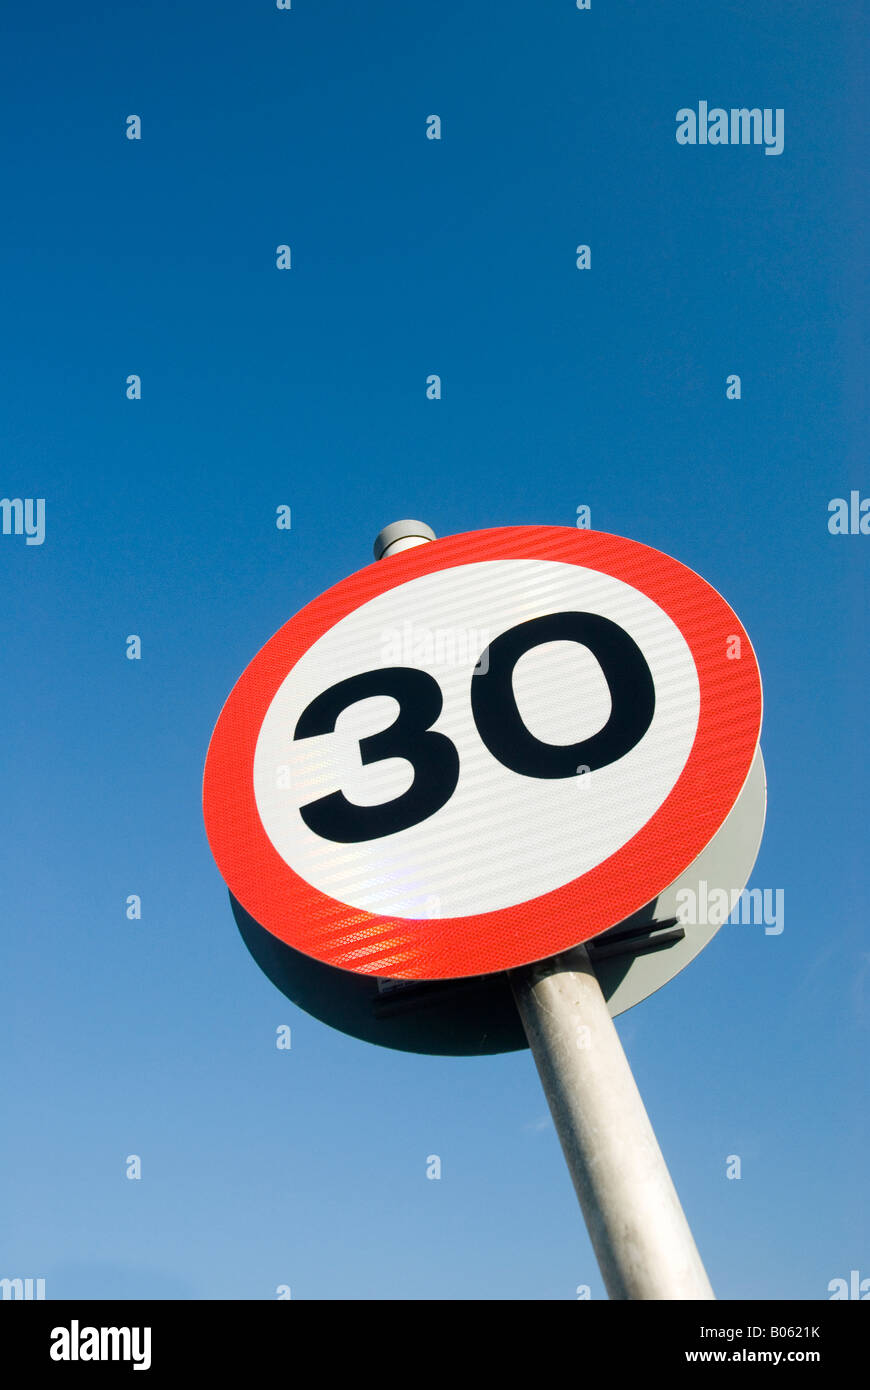 30 mph speed limit sign against blue sky background Stock Photo